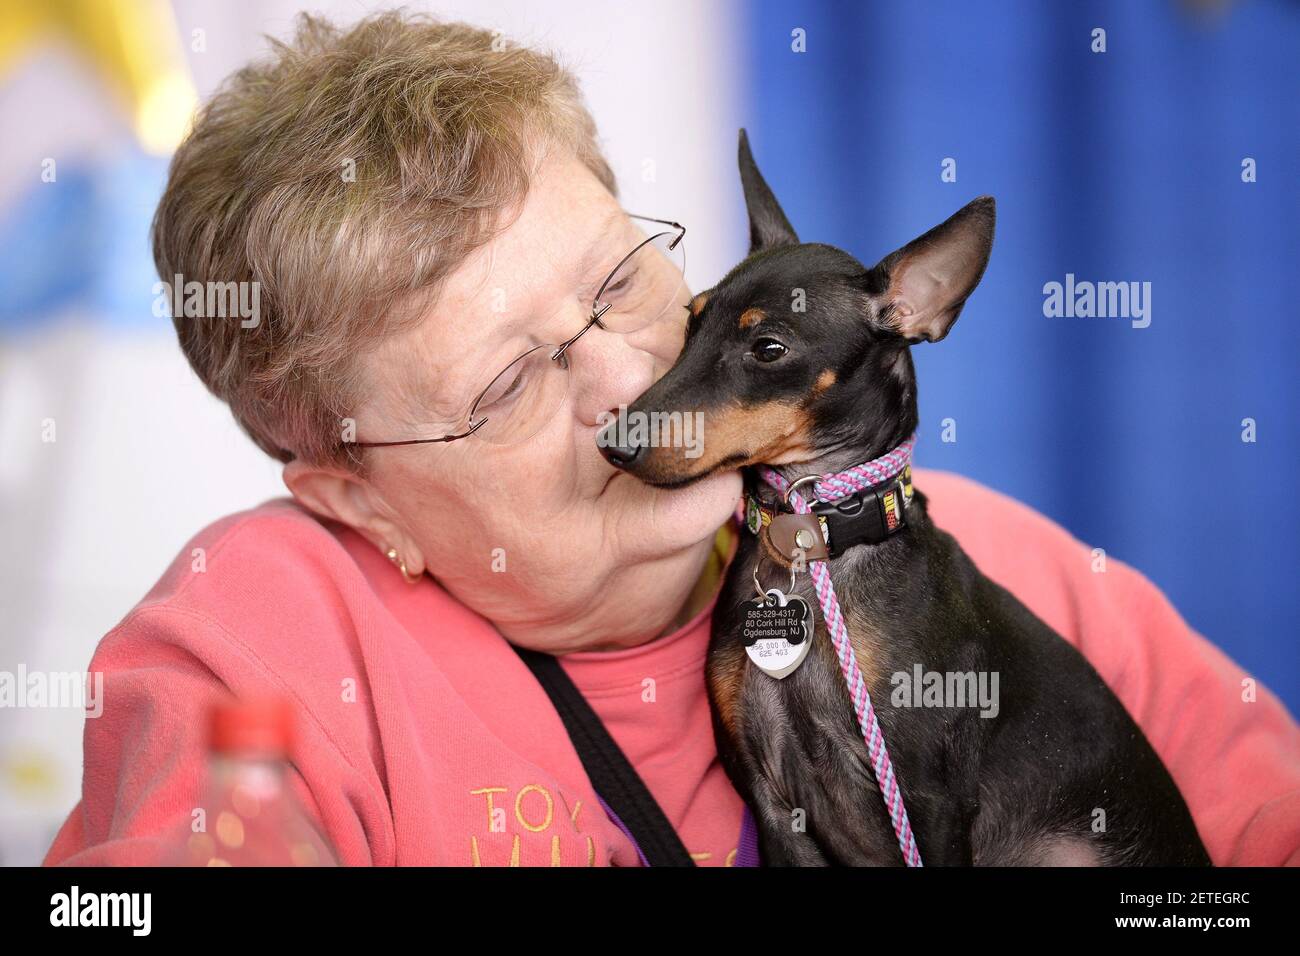 A woman cuddles with a Manchester Terrier named Katana during the 141th  Annual Westminster Kennel Club Dog Show at Pier 92 in New York, NY, on  February 11, 2017. (Photo by Anthony